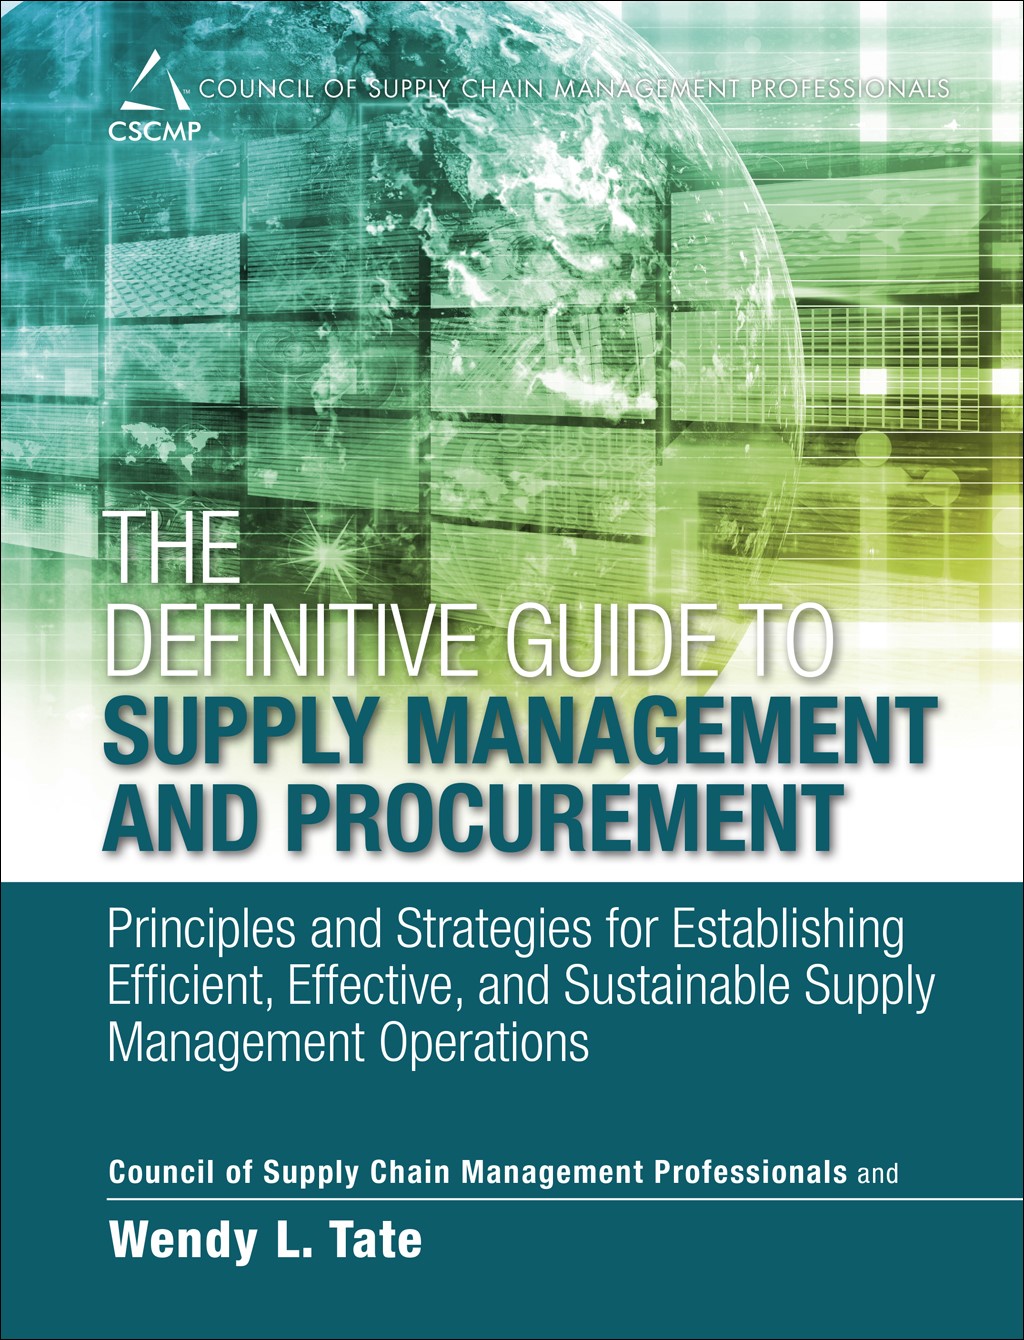 The Definitive Guide to Supply Management and Procurement (paperback)